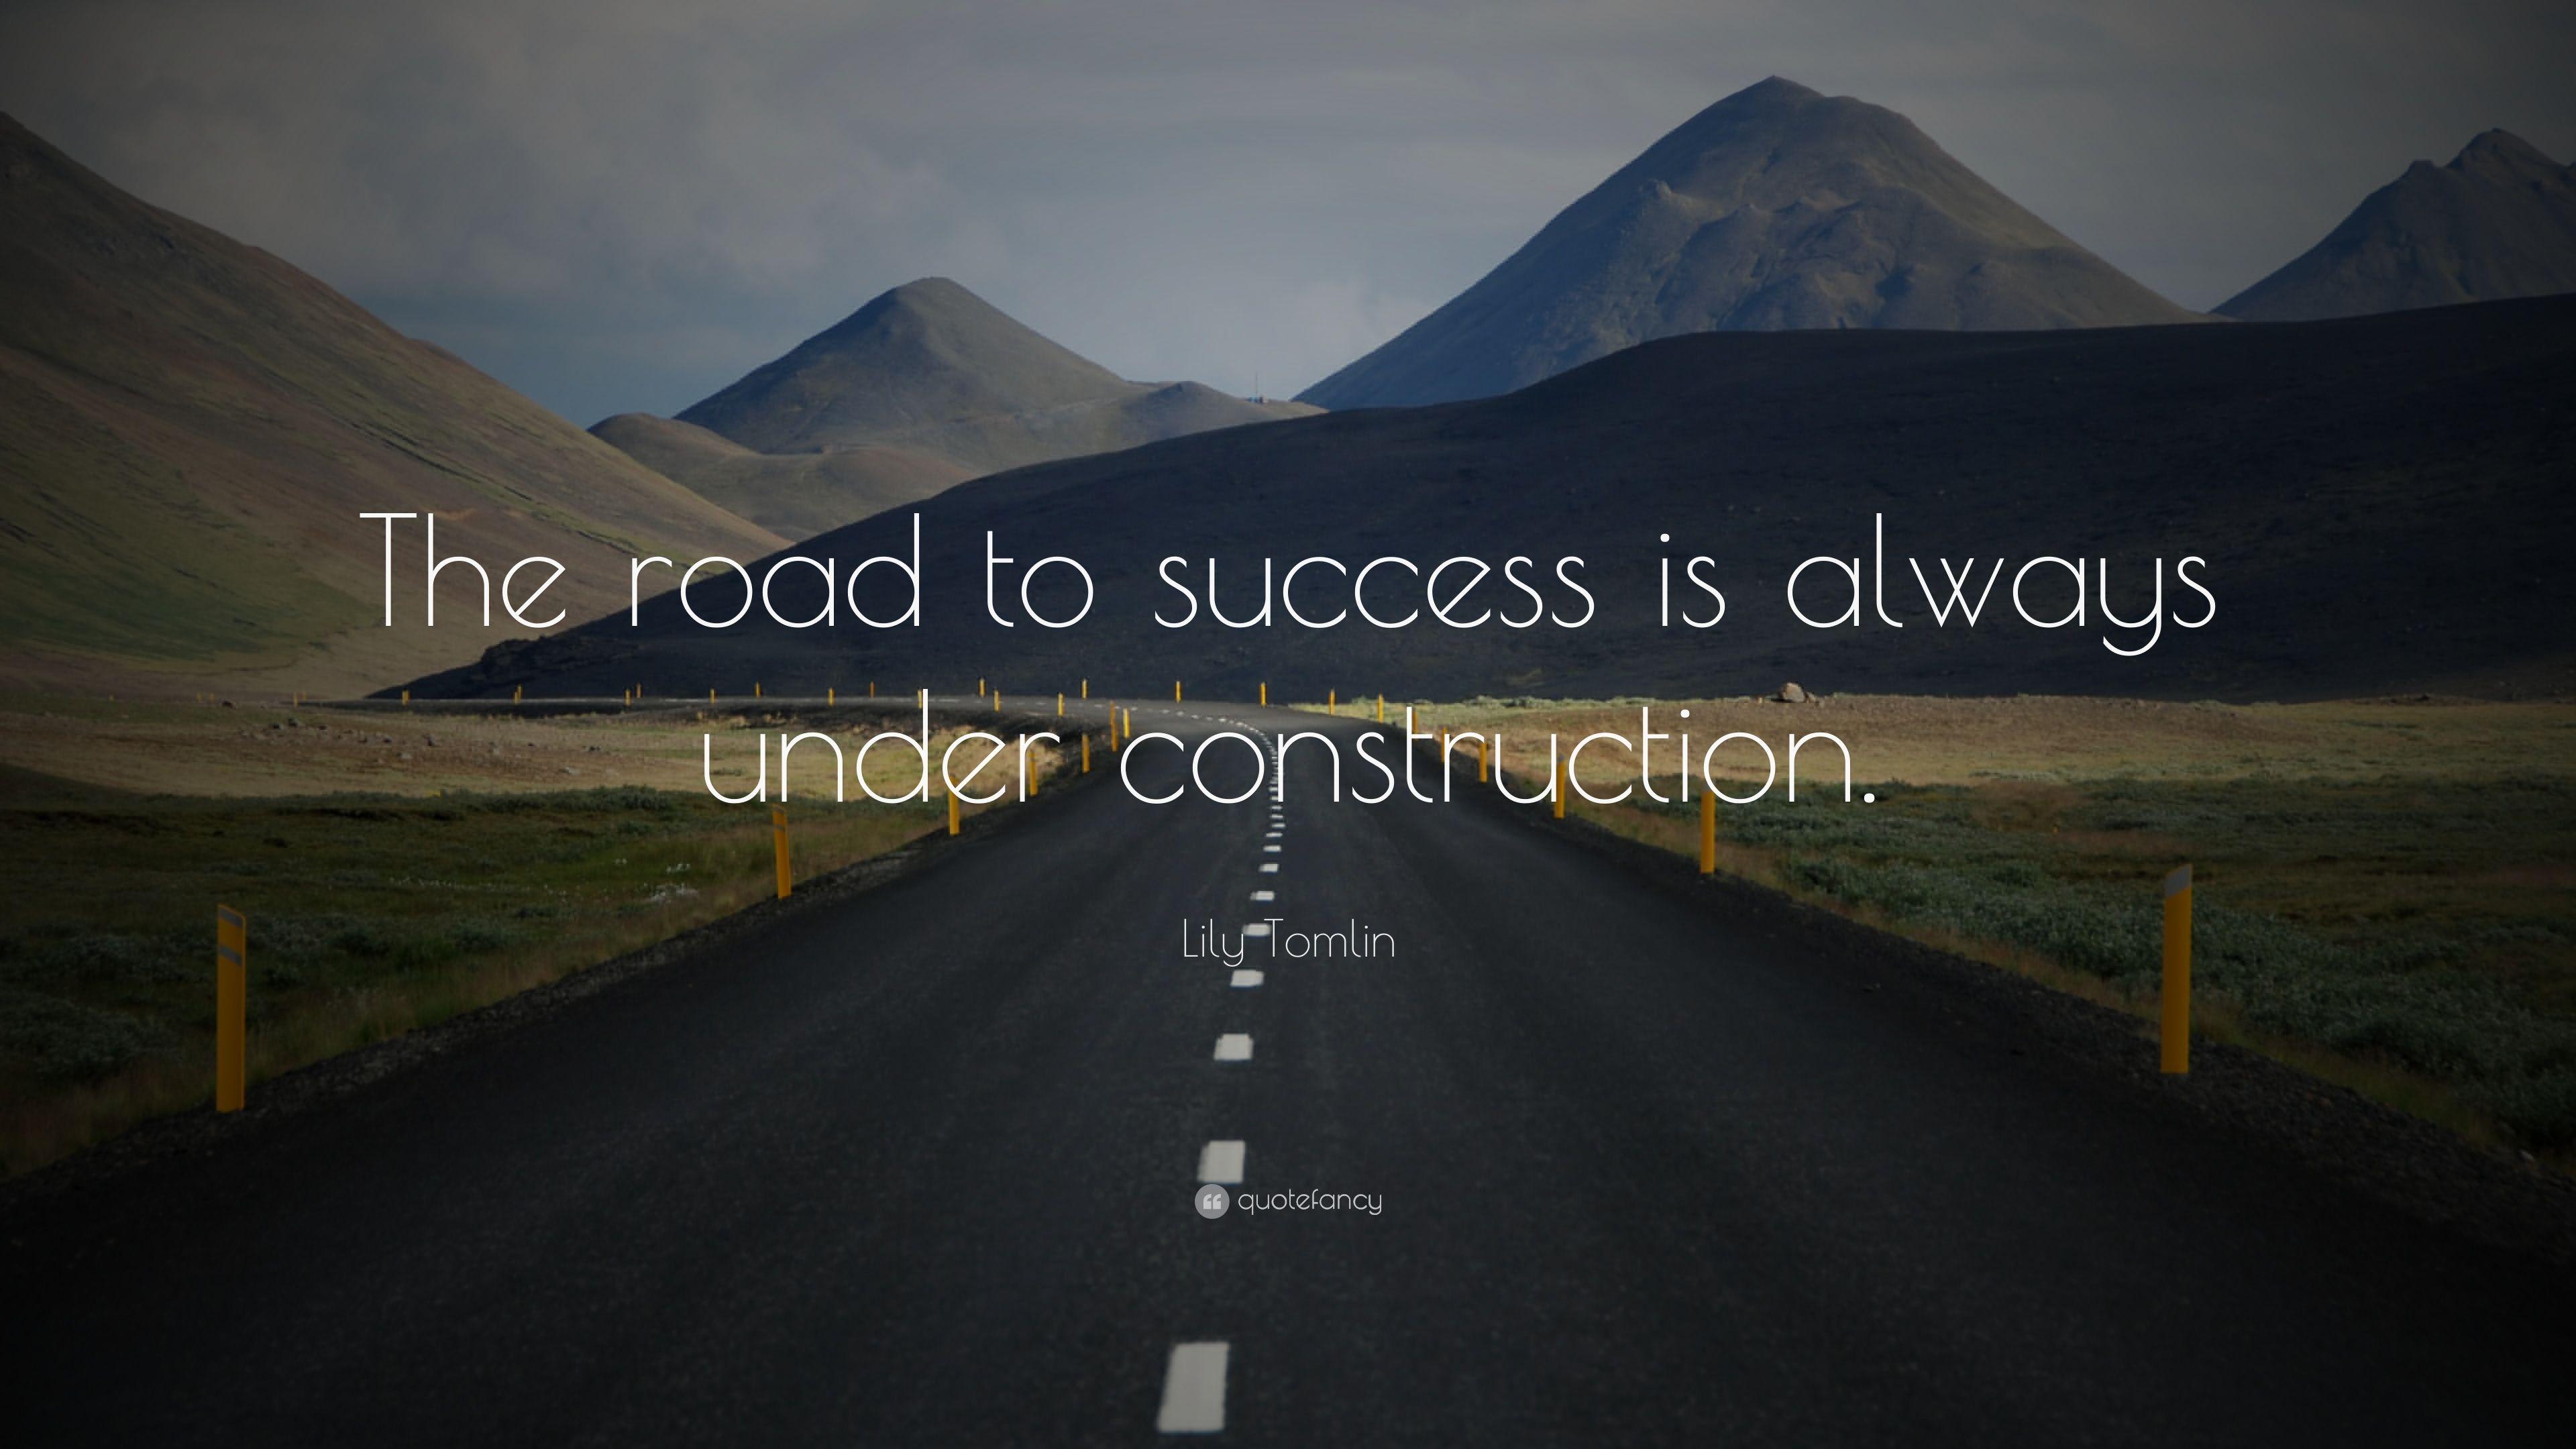 Lily Tomlin Quote: “The road to success is always under